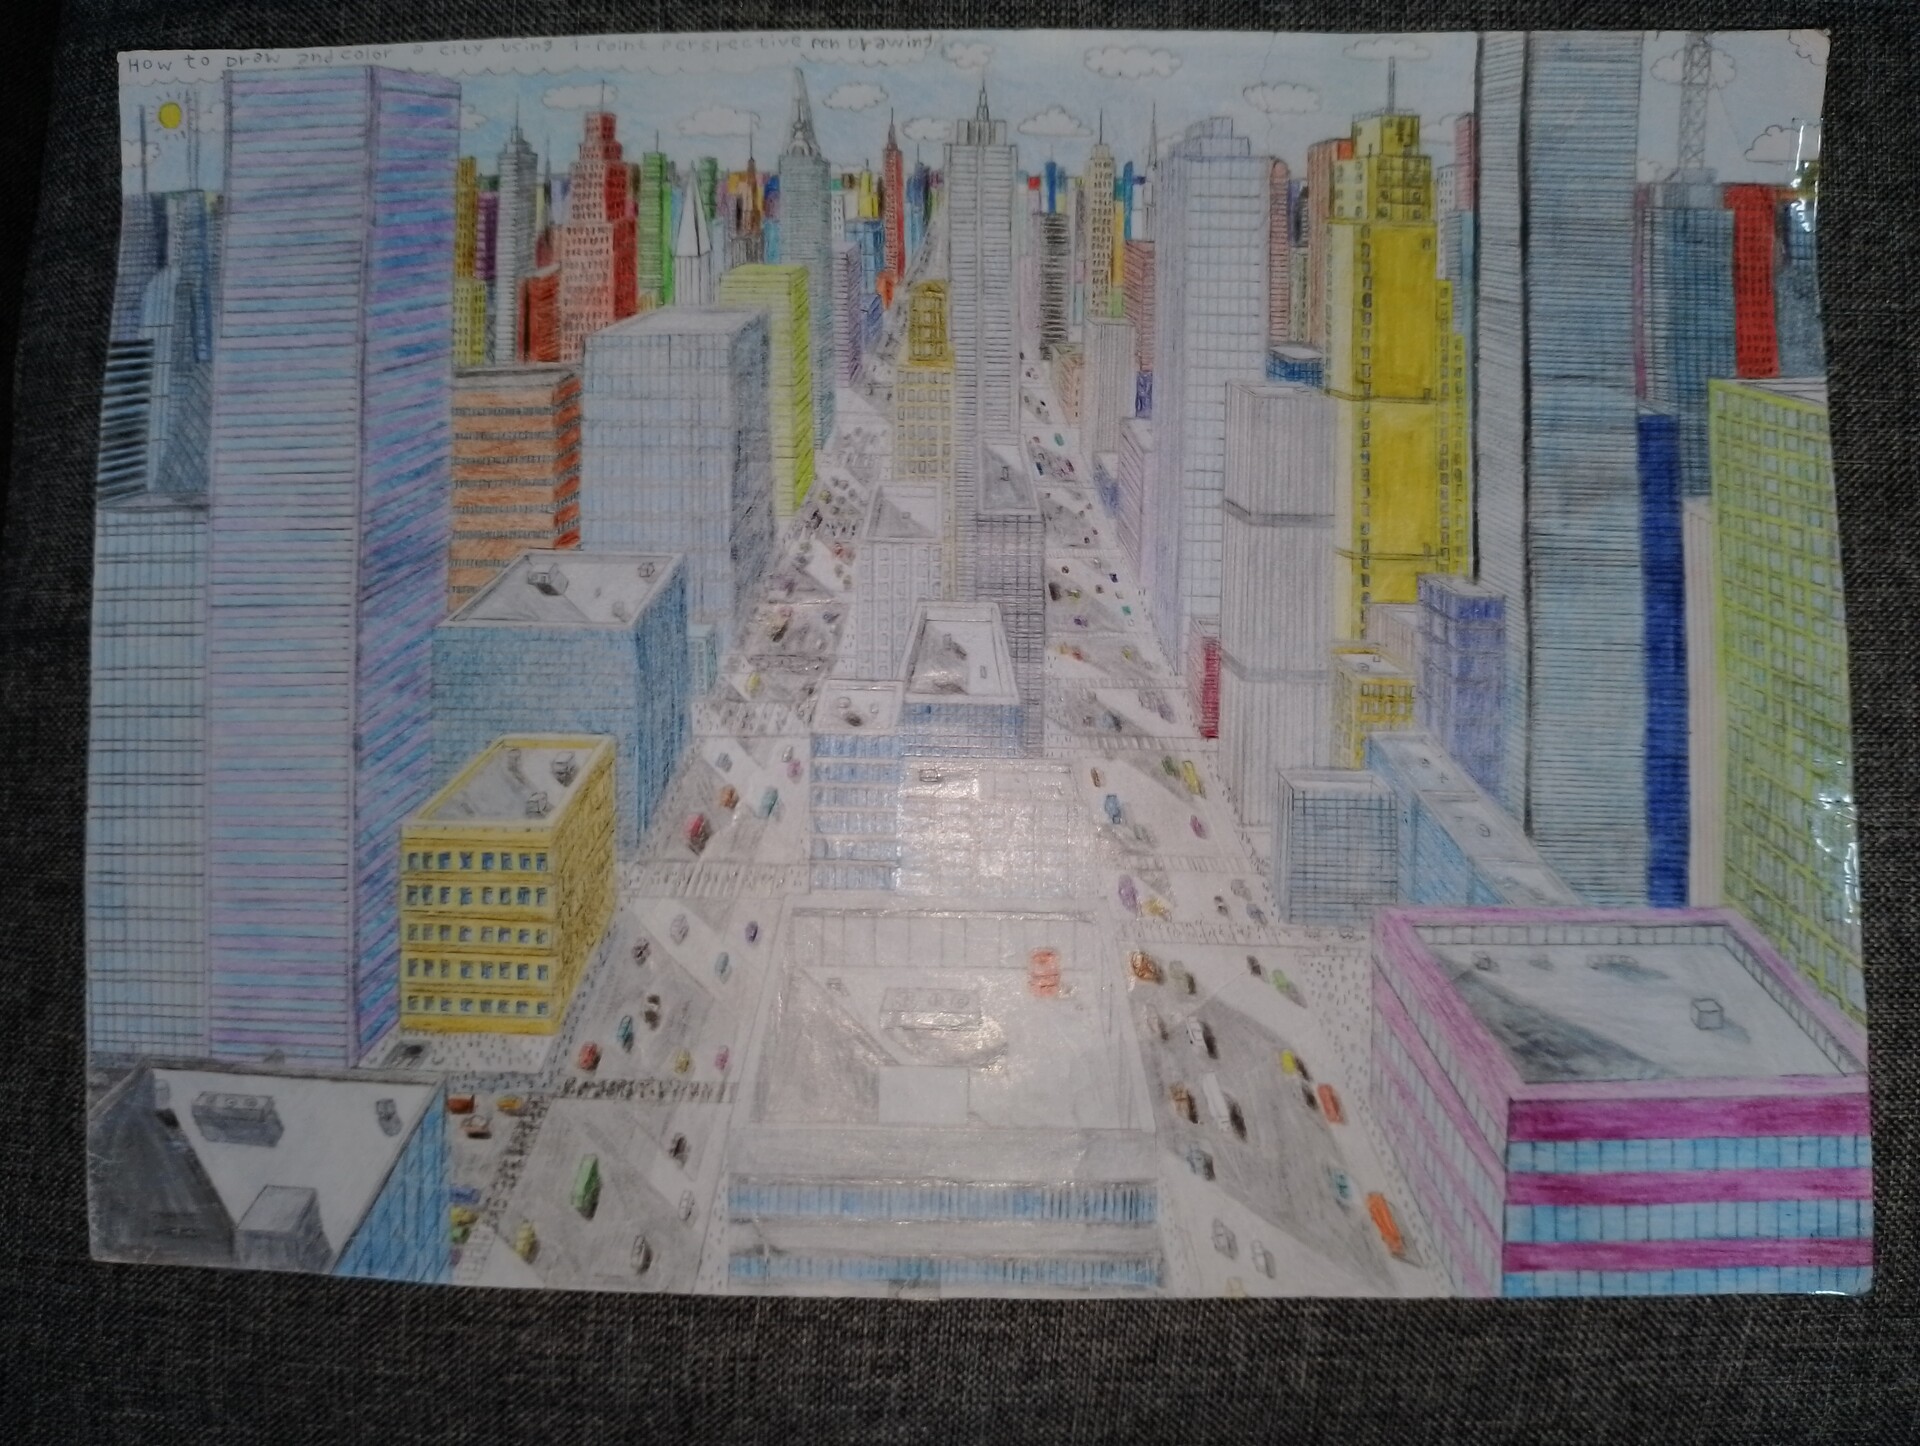 Lexica - Line drawing color of city , van gogh style painting